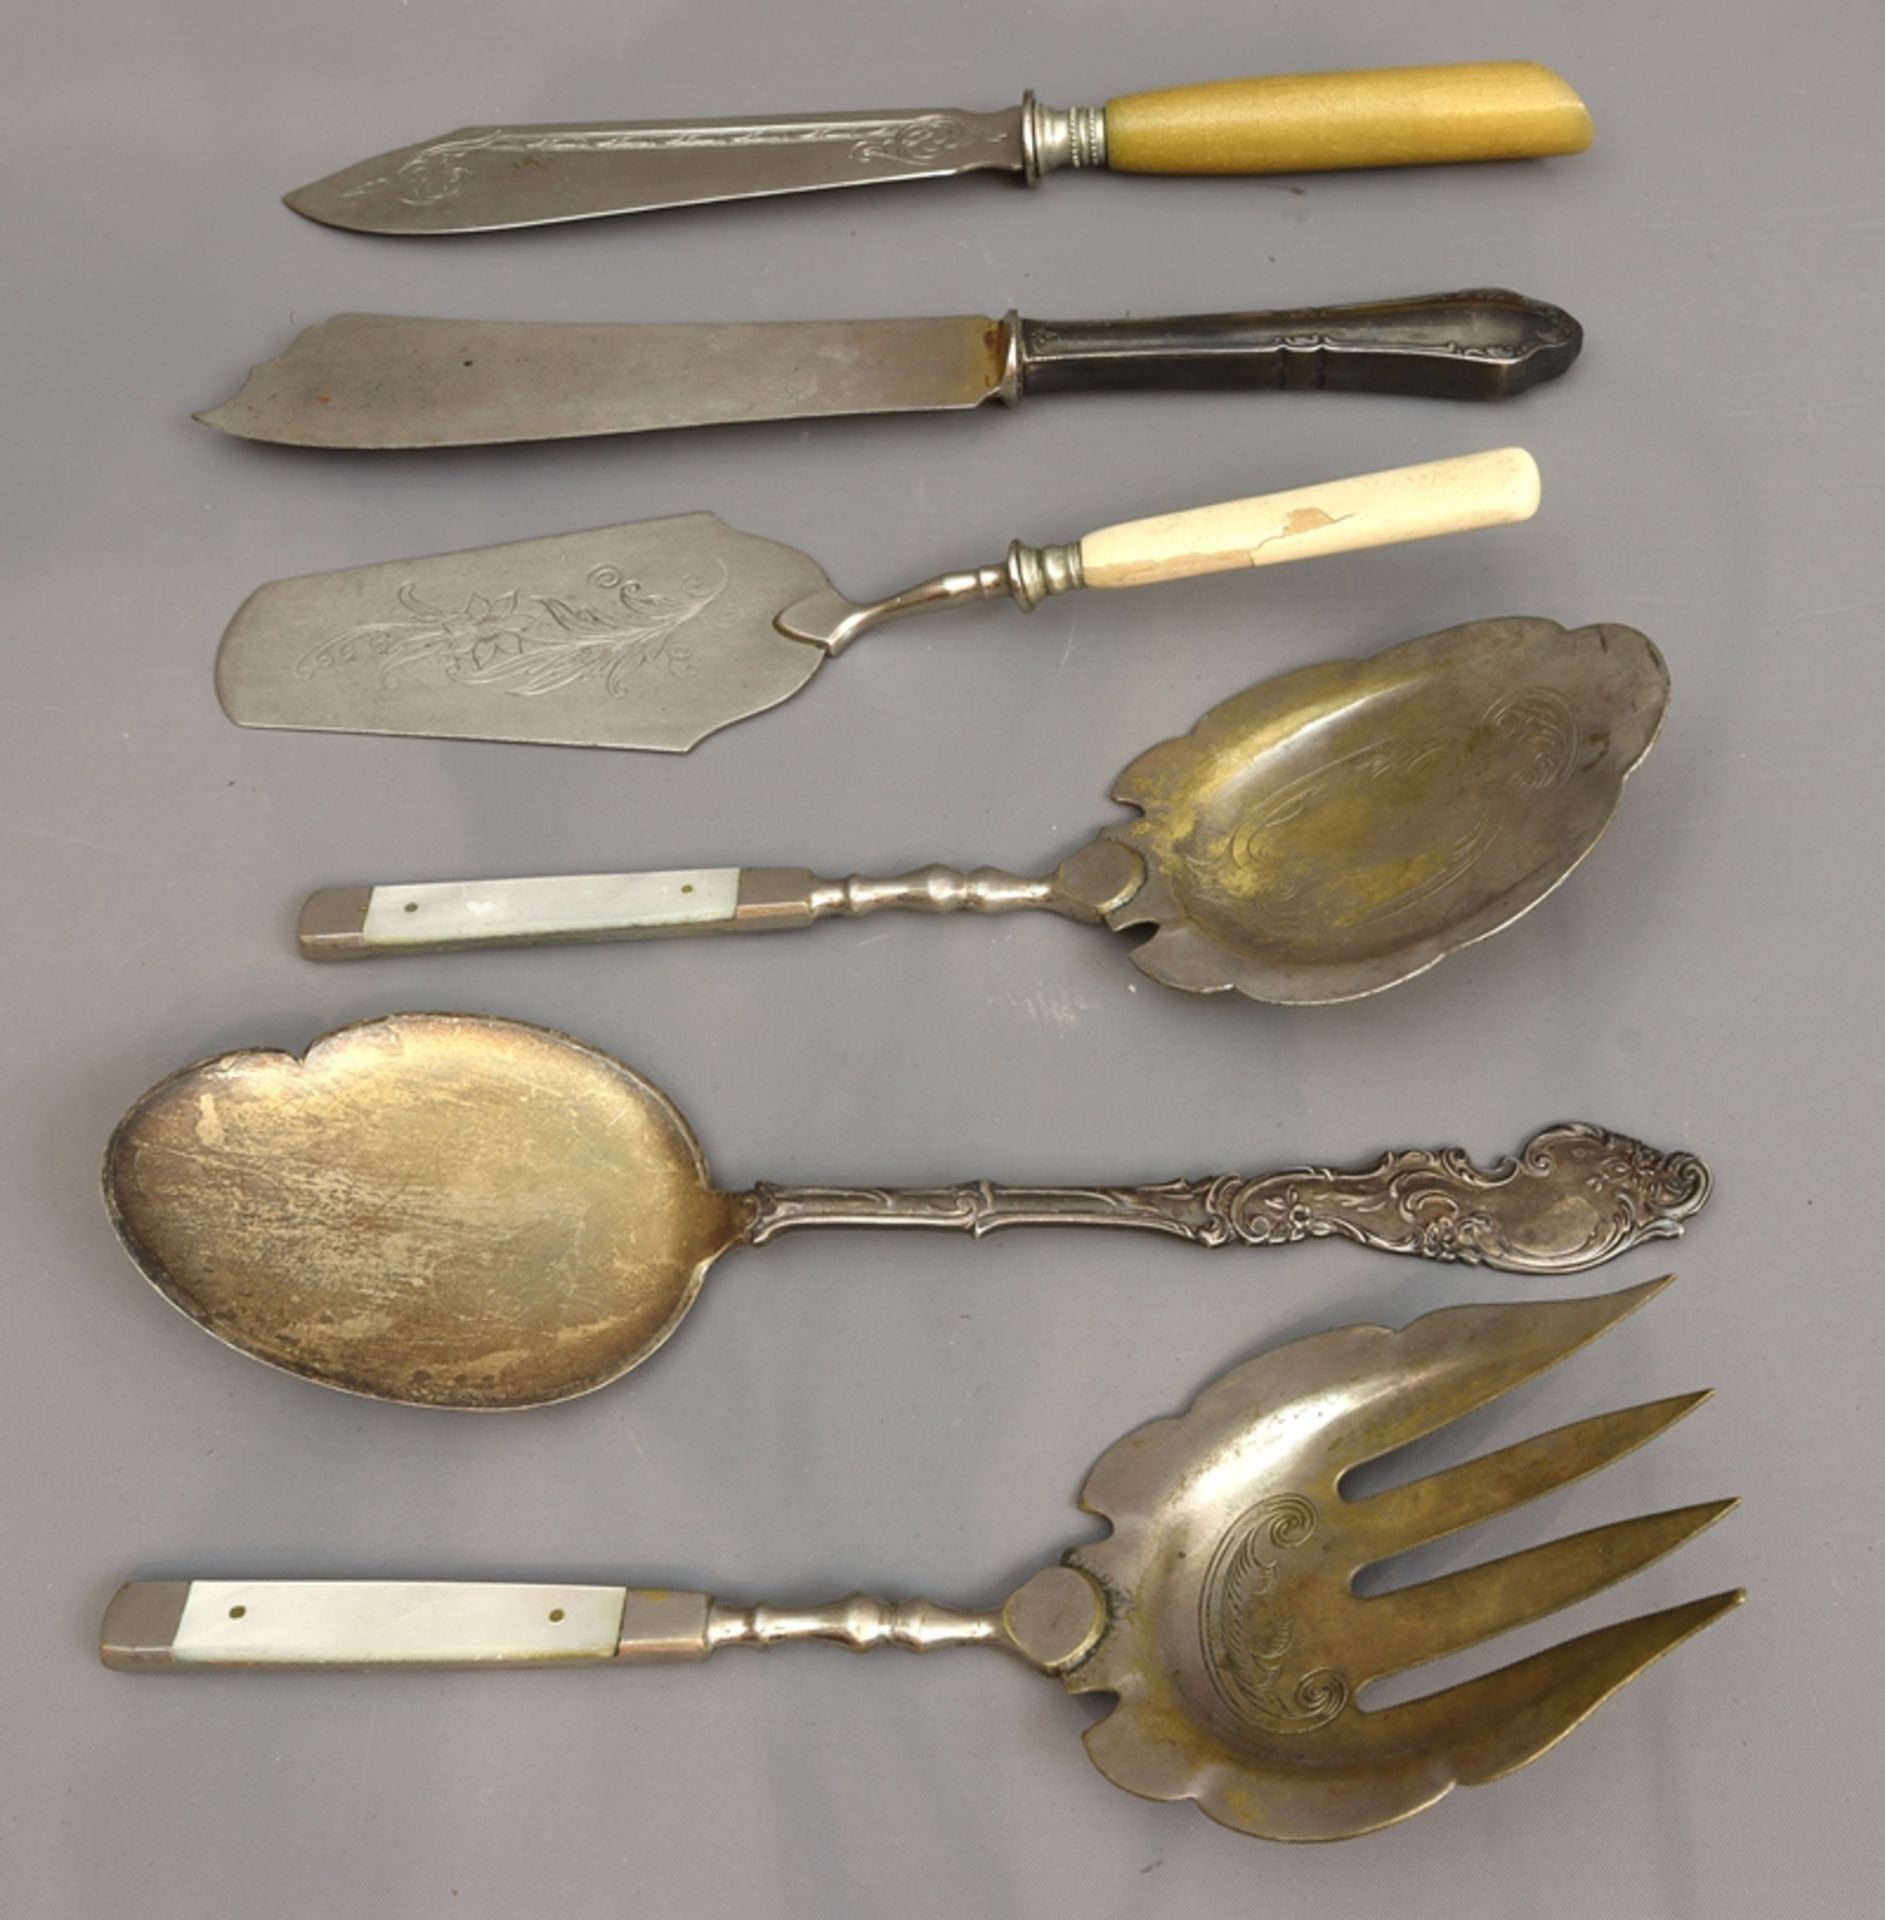 Lot of cake knives and lifters, Historicism c. 1900-1920, German